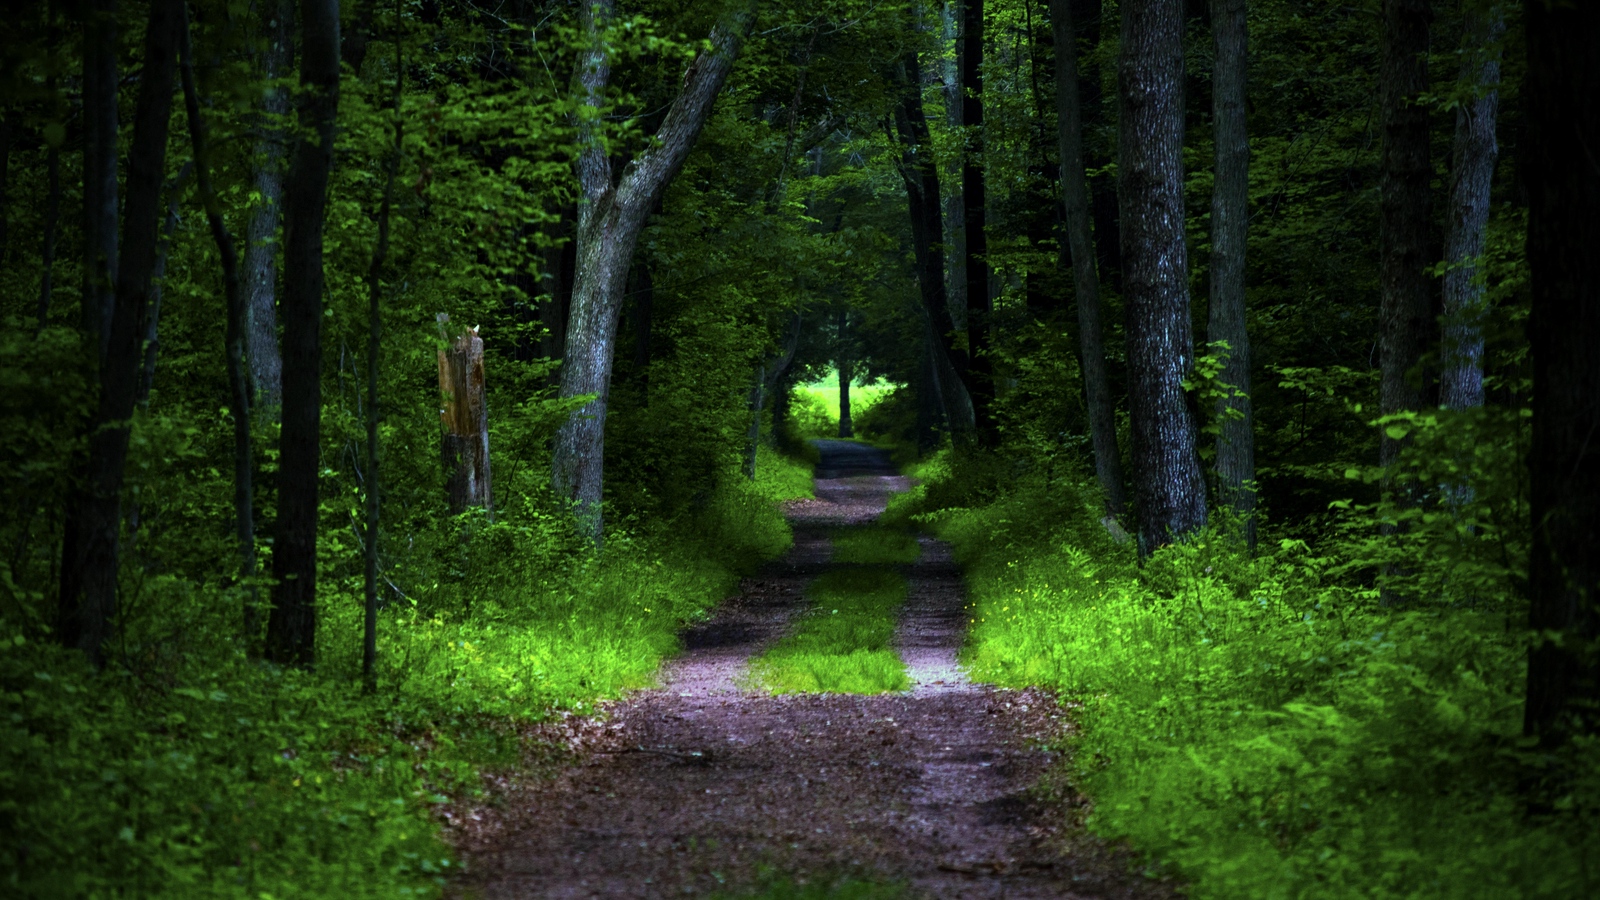 Wallpaper Forest, Pathway, Trees, Vegetation, Nature - 16:10 Aspect Ratio , HD Wallpaper & Backgrounds